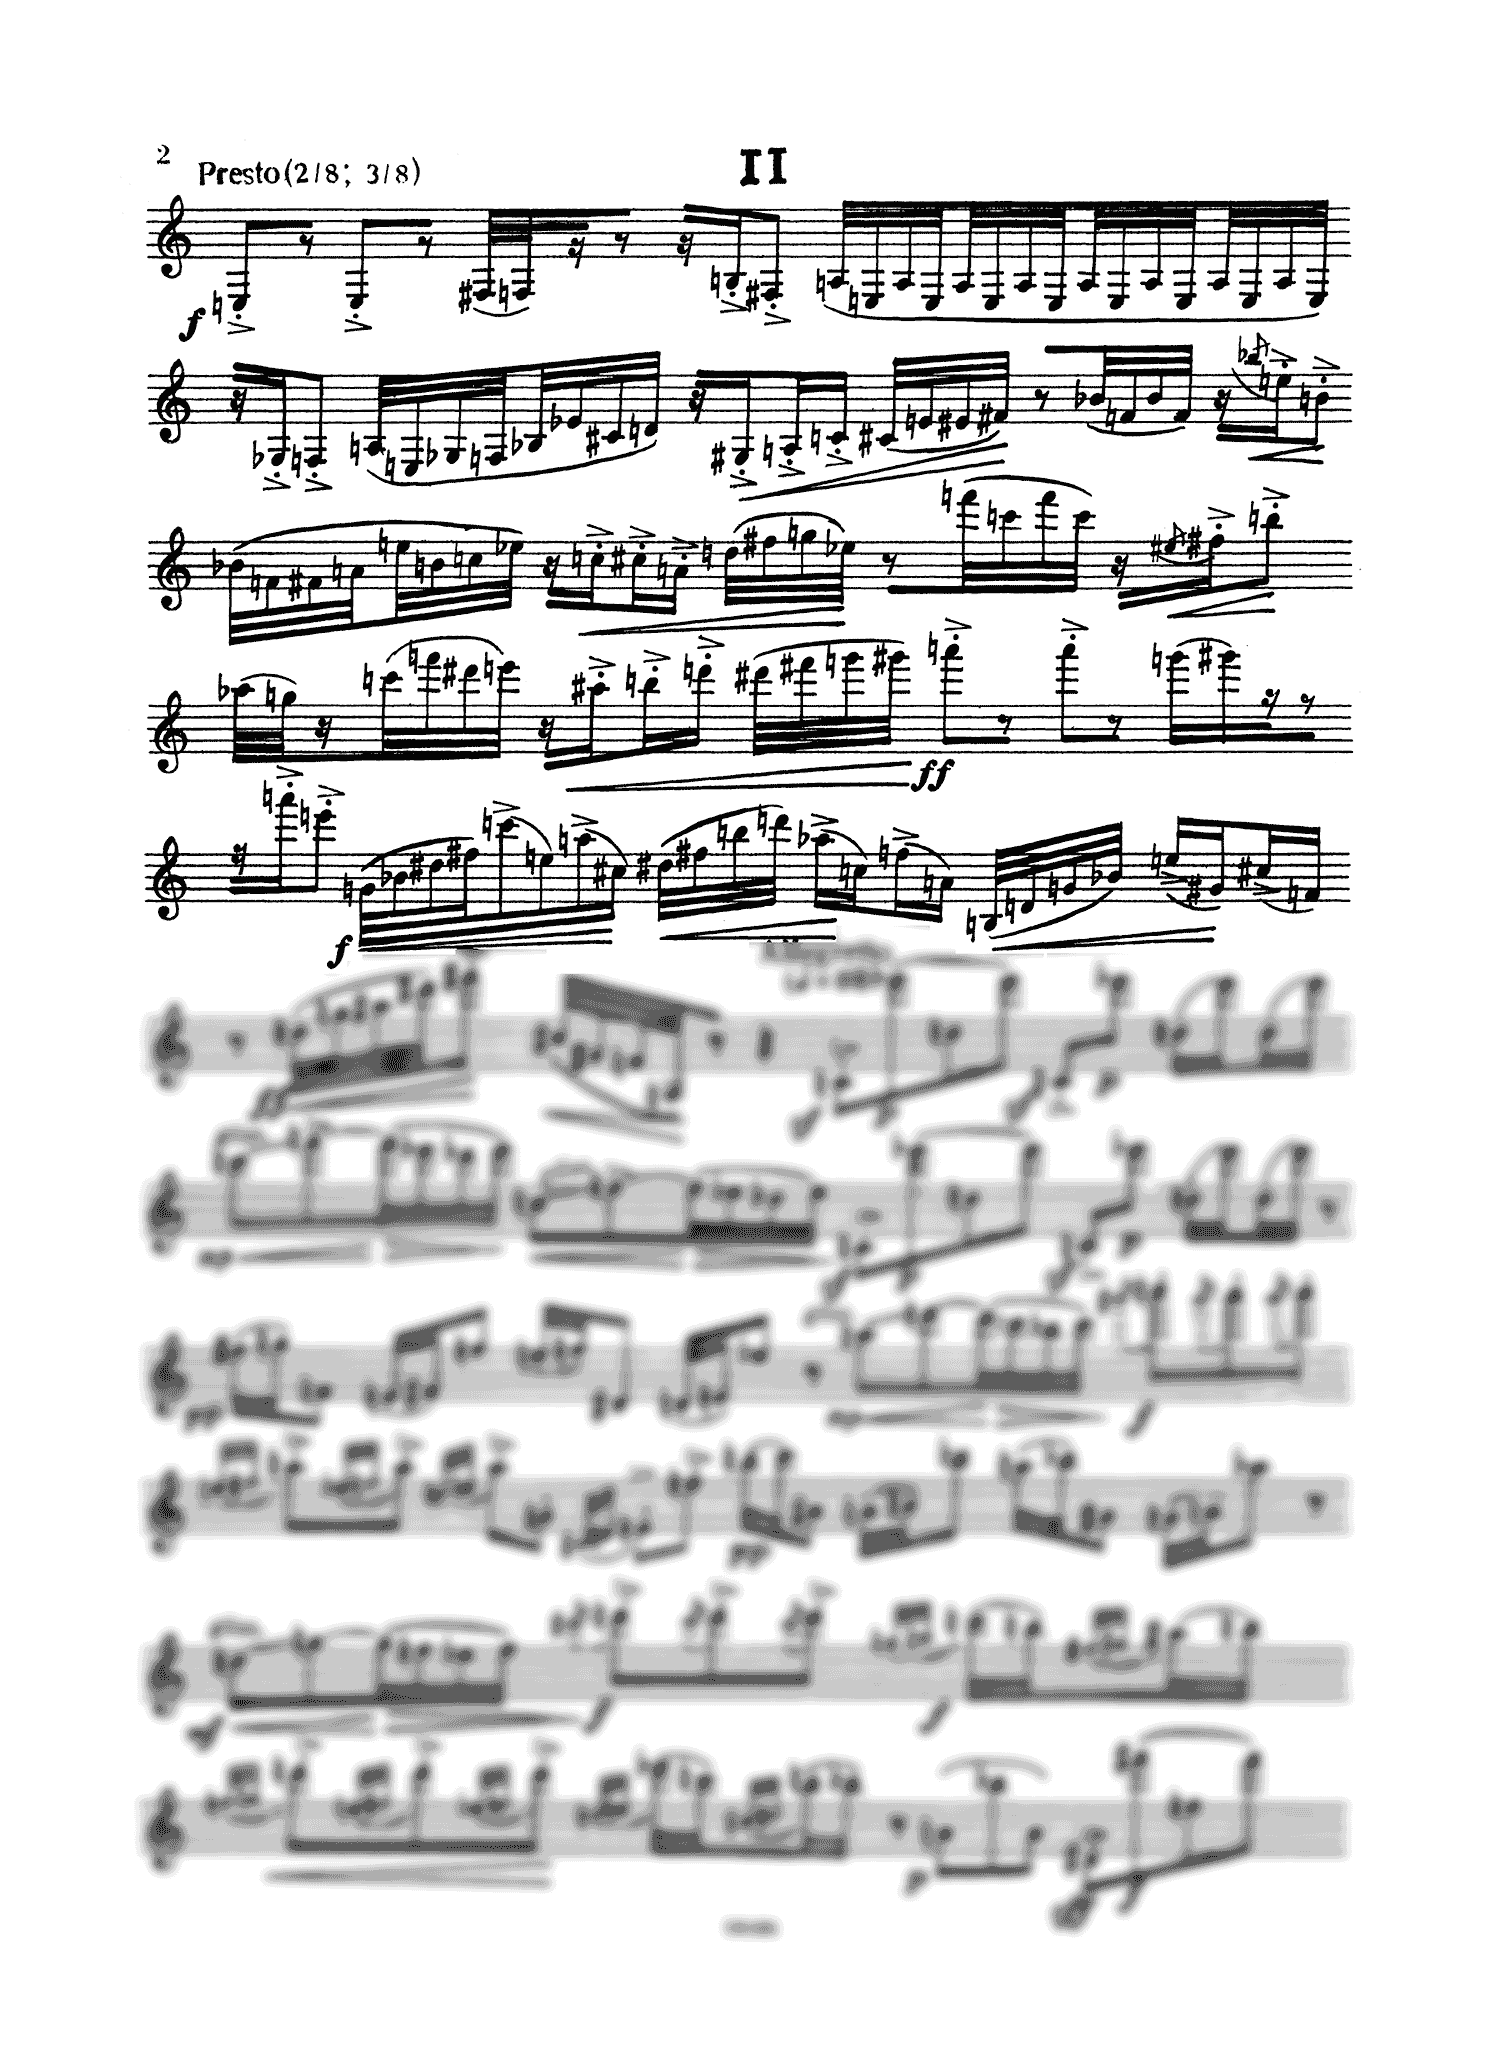 Bucchi Concert for solo clarinet - Movement 2